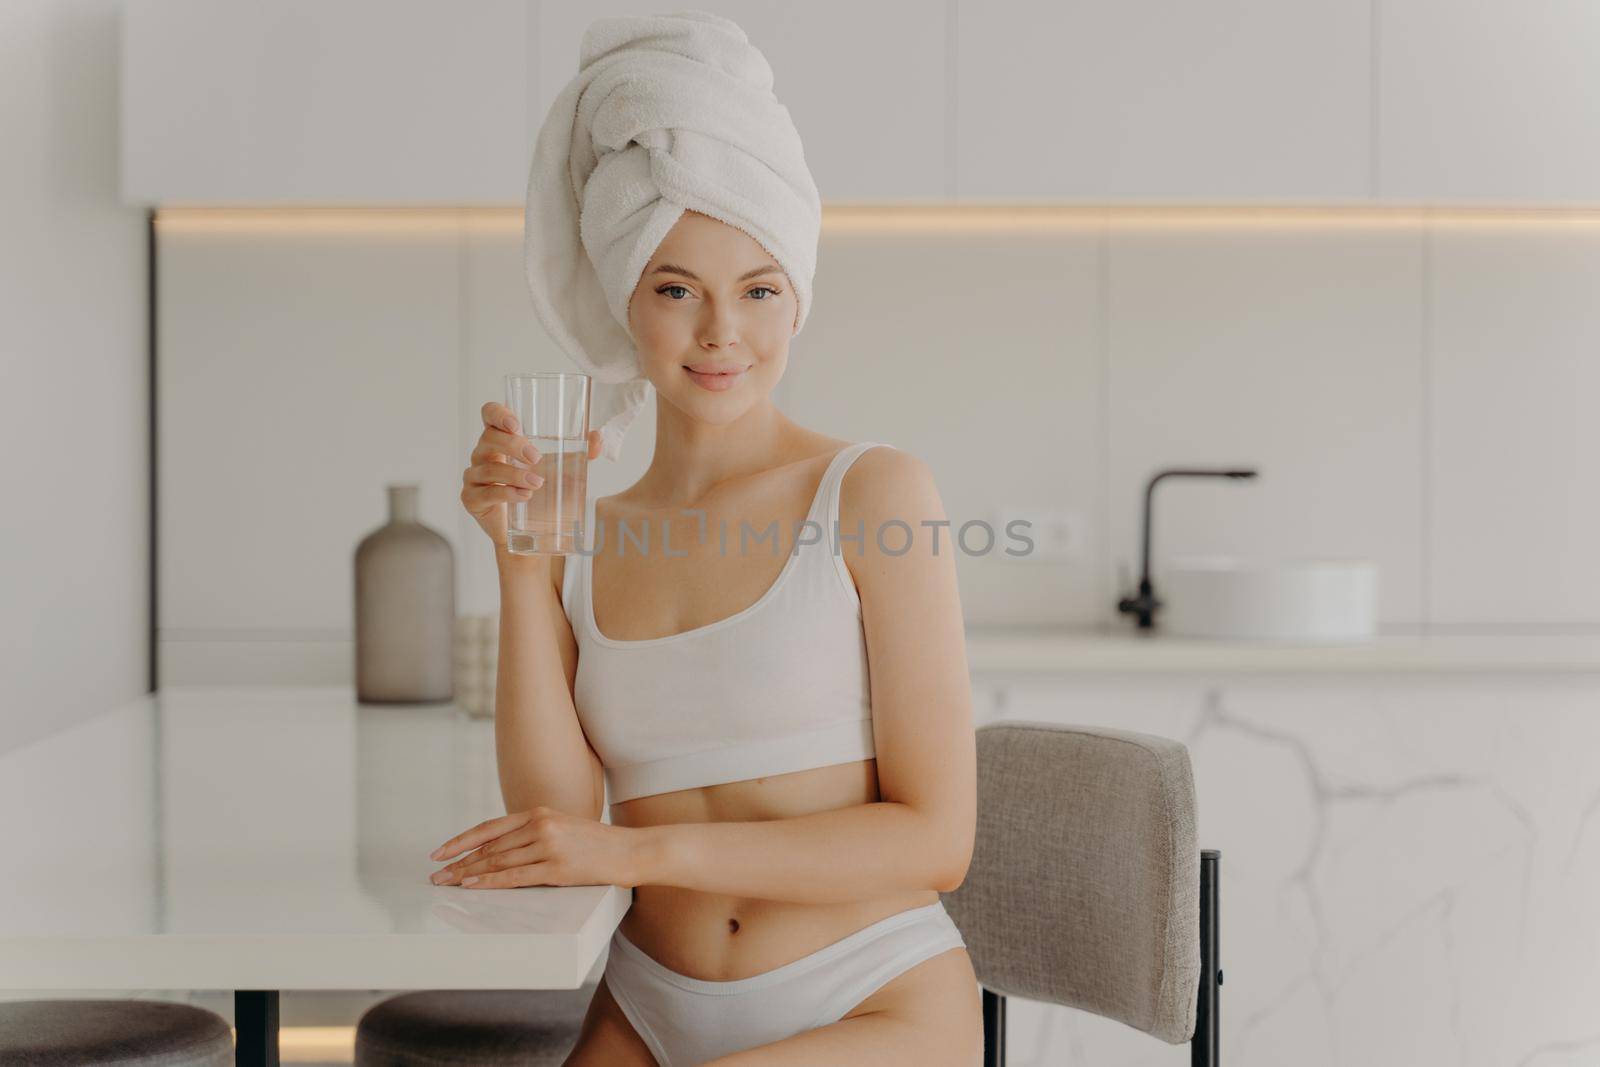 Good morning. Portrait of young slim female model posing with glass of water and smiling at camera, sitting in kitchen in white classic underwear and bath towel wrapped on head. Healthcare concept